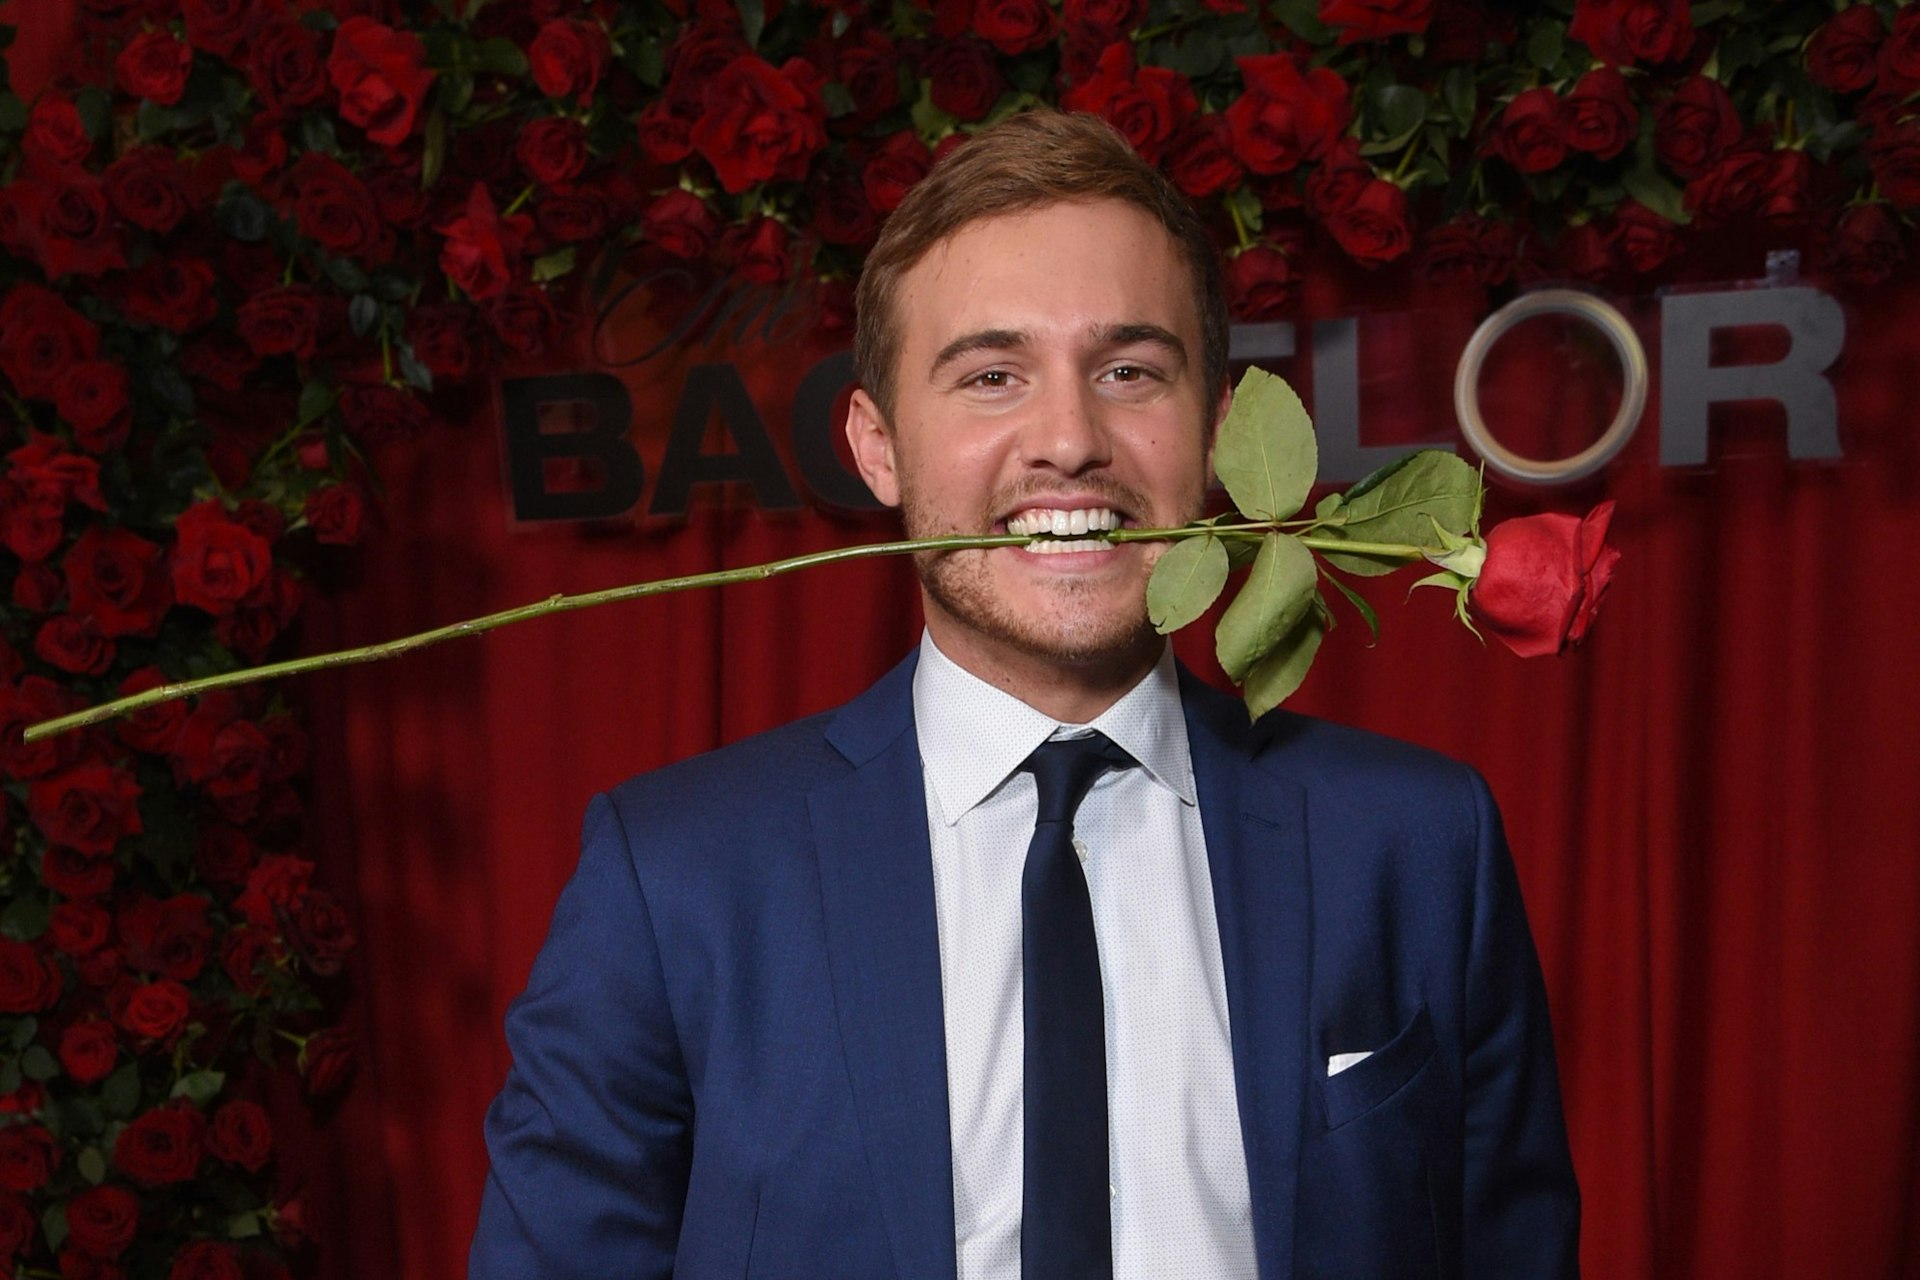 The Bachelor star with a rose in his mouth